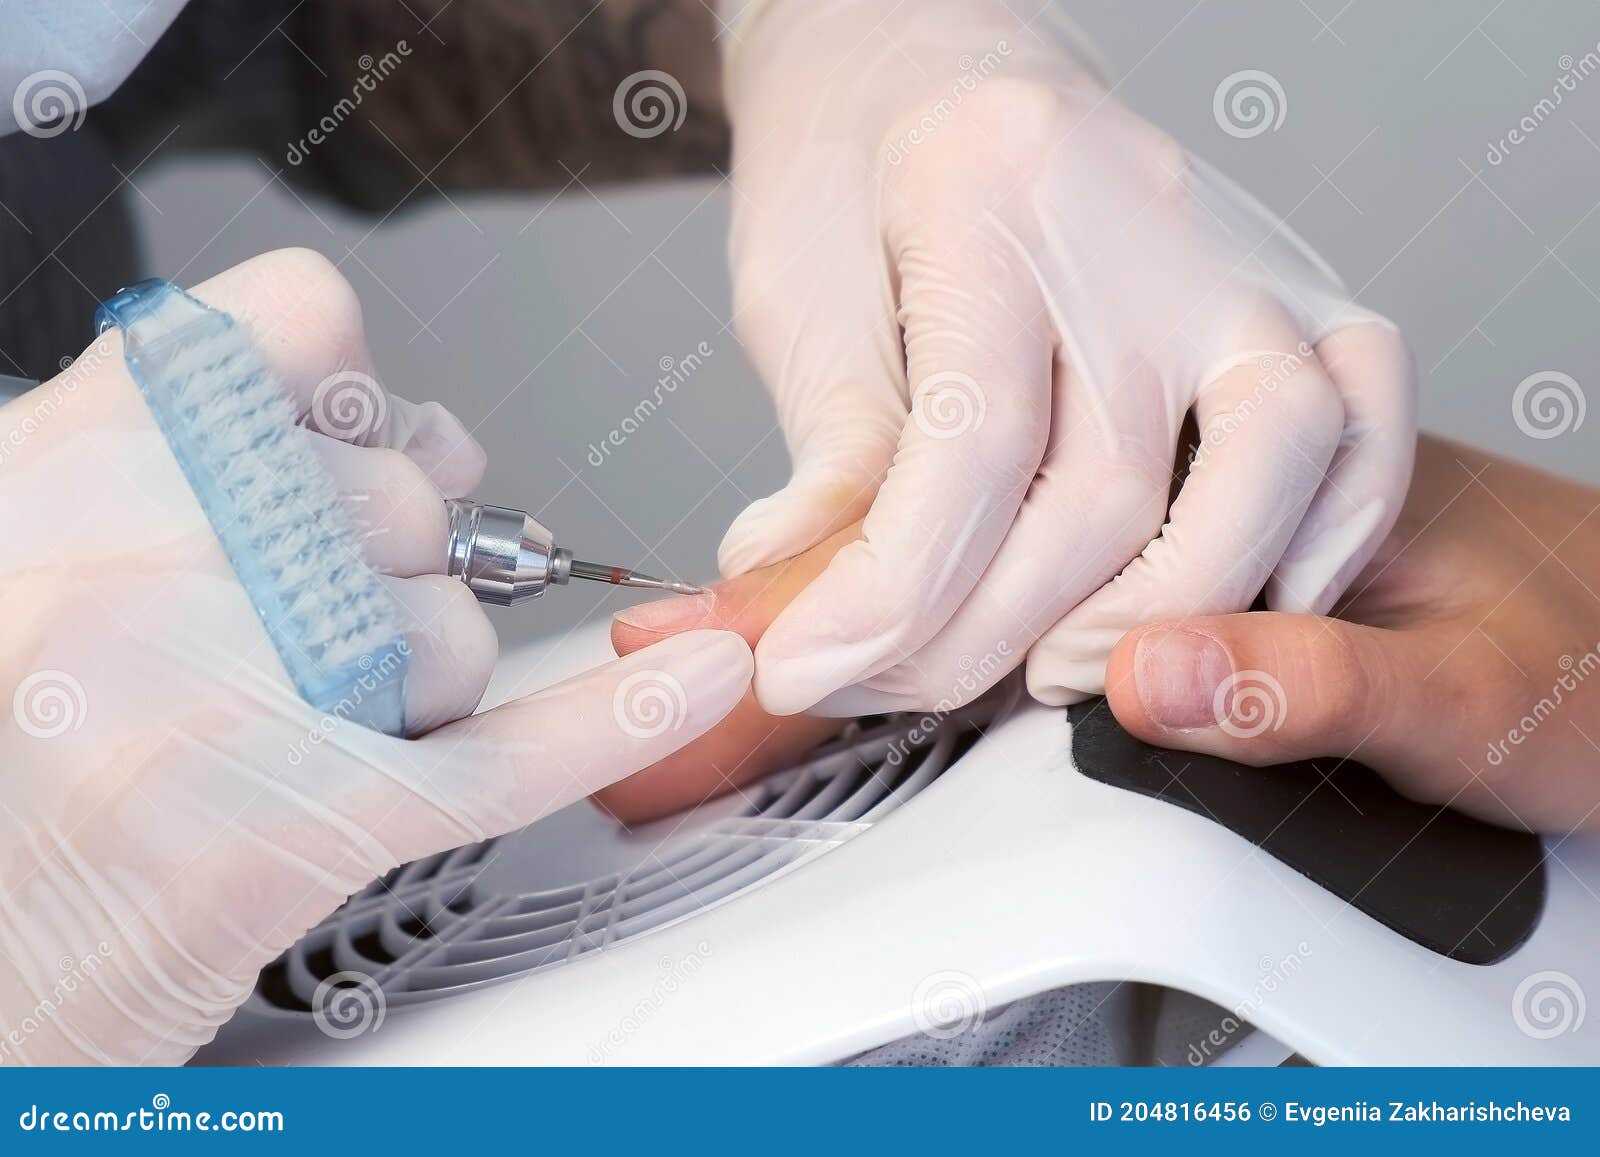 woman manicurist removing cuticle and pterygium using apparatus, closeup view.